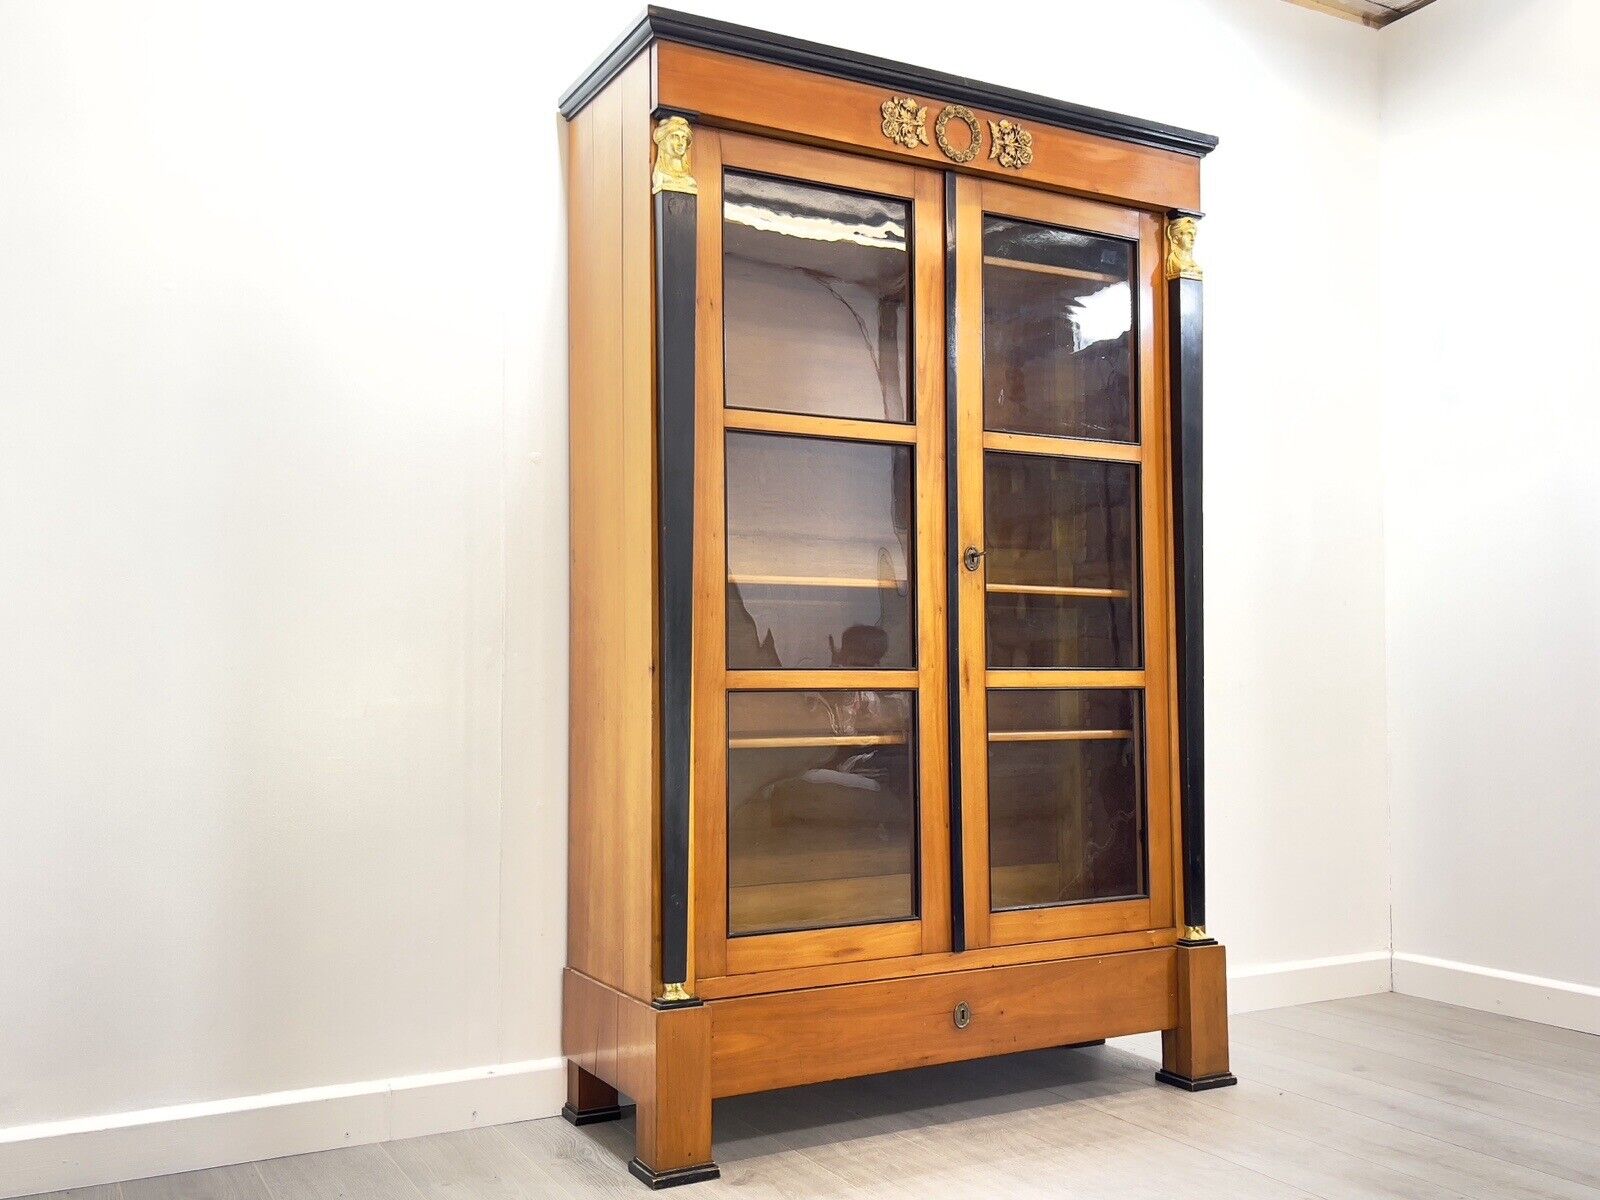 19th Century French Empire Style Vitrine / Display Cabinet with Ormolu Details